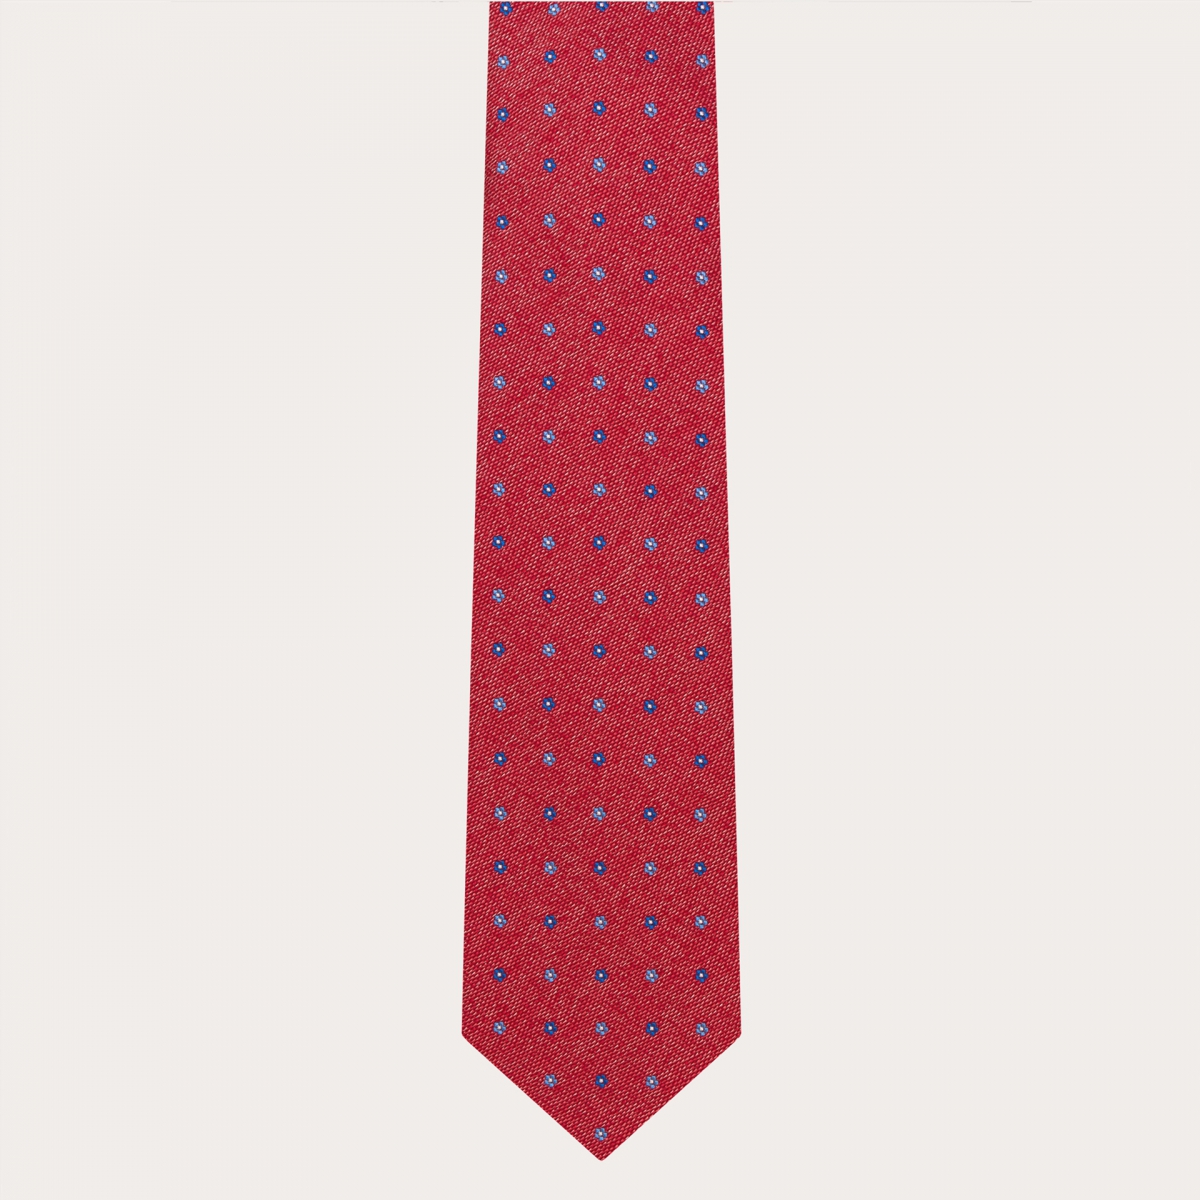 Italian silk jacquard tie, red with floral pattern